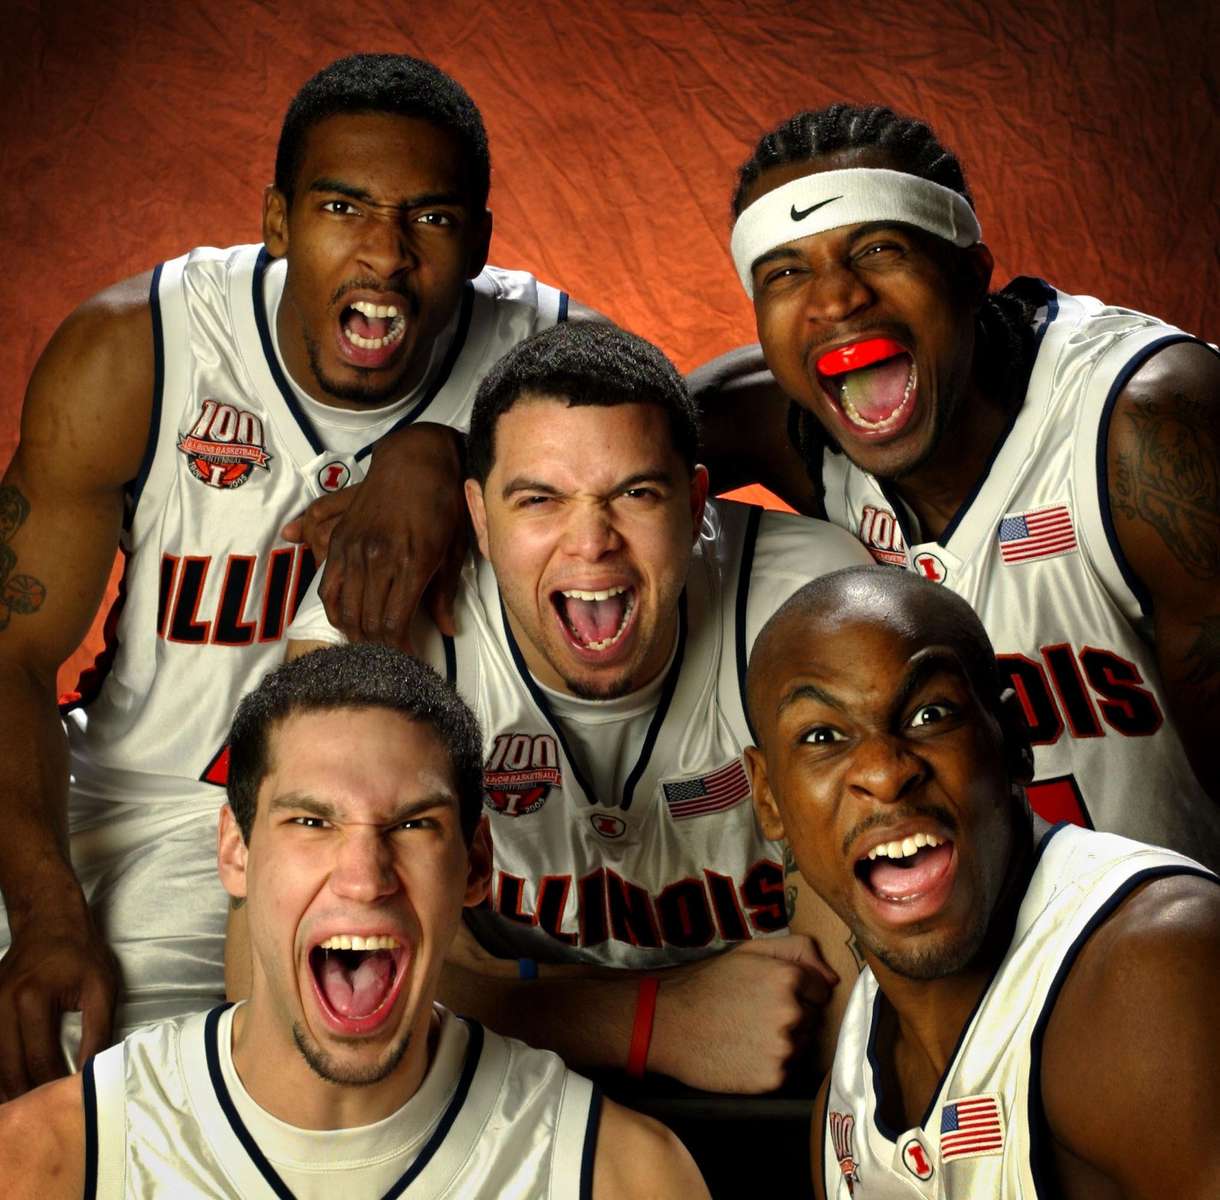 The 2005 Illinois mens basketball team Luther Head, top left, Dee Brown, top right, Deron Williams, center, James Augustine, bottom left, and Roger Powell, bottom right, display some of the fire that propelled them to finisht the regular season 29-1 in Champagne, Ill. on Thursday March 3, 2005.  